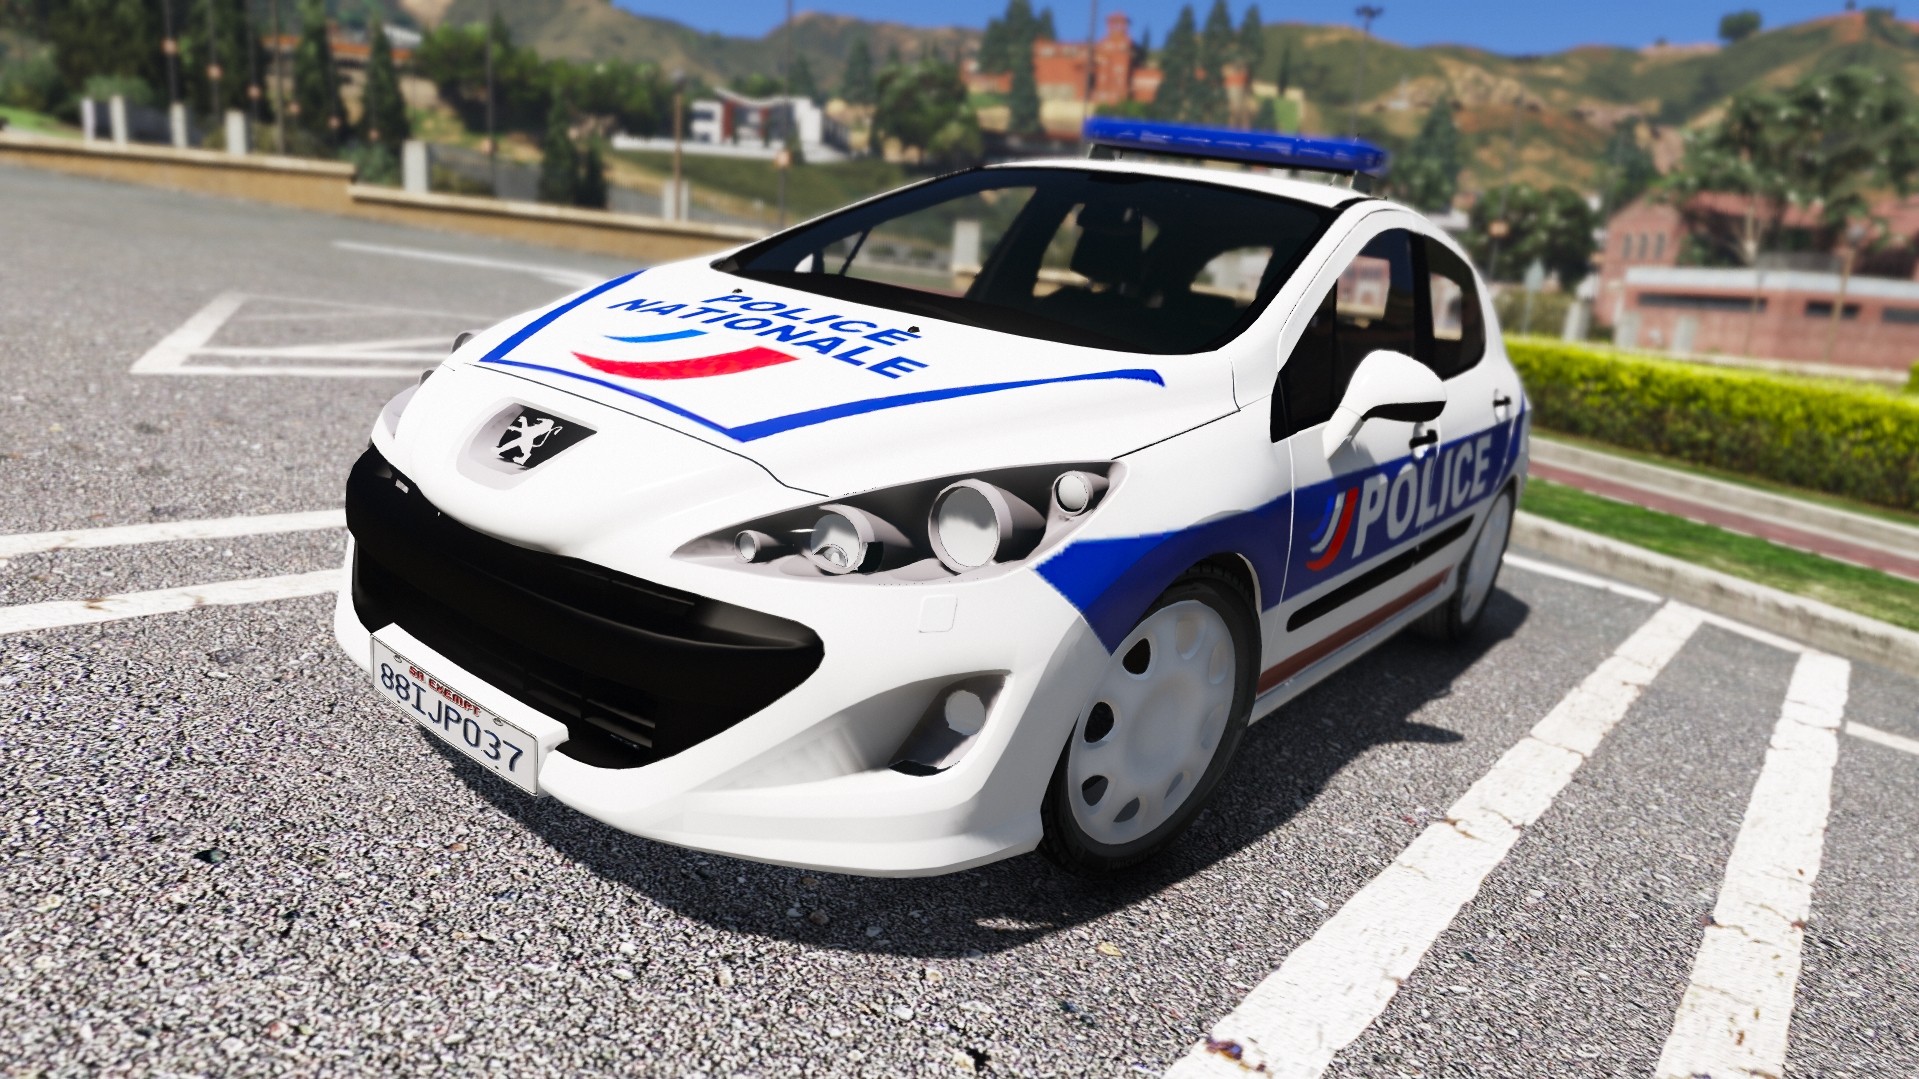 Peugeot 308 Police Nationale